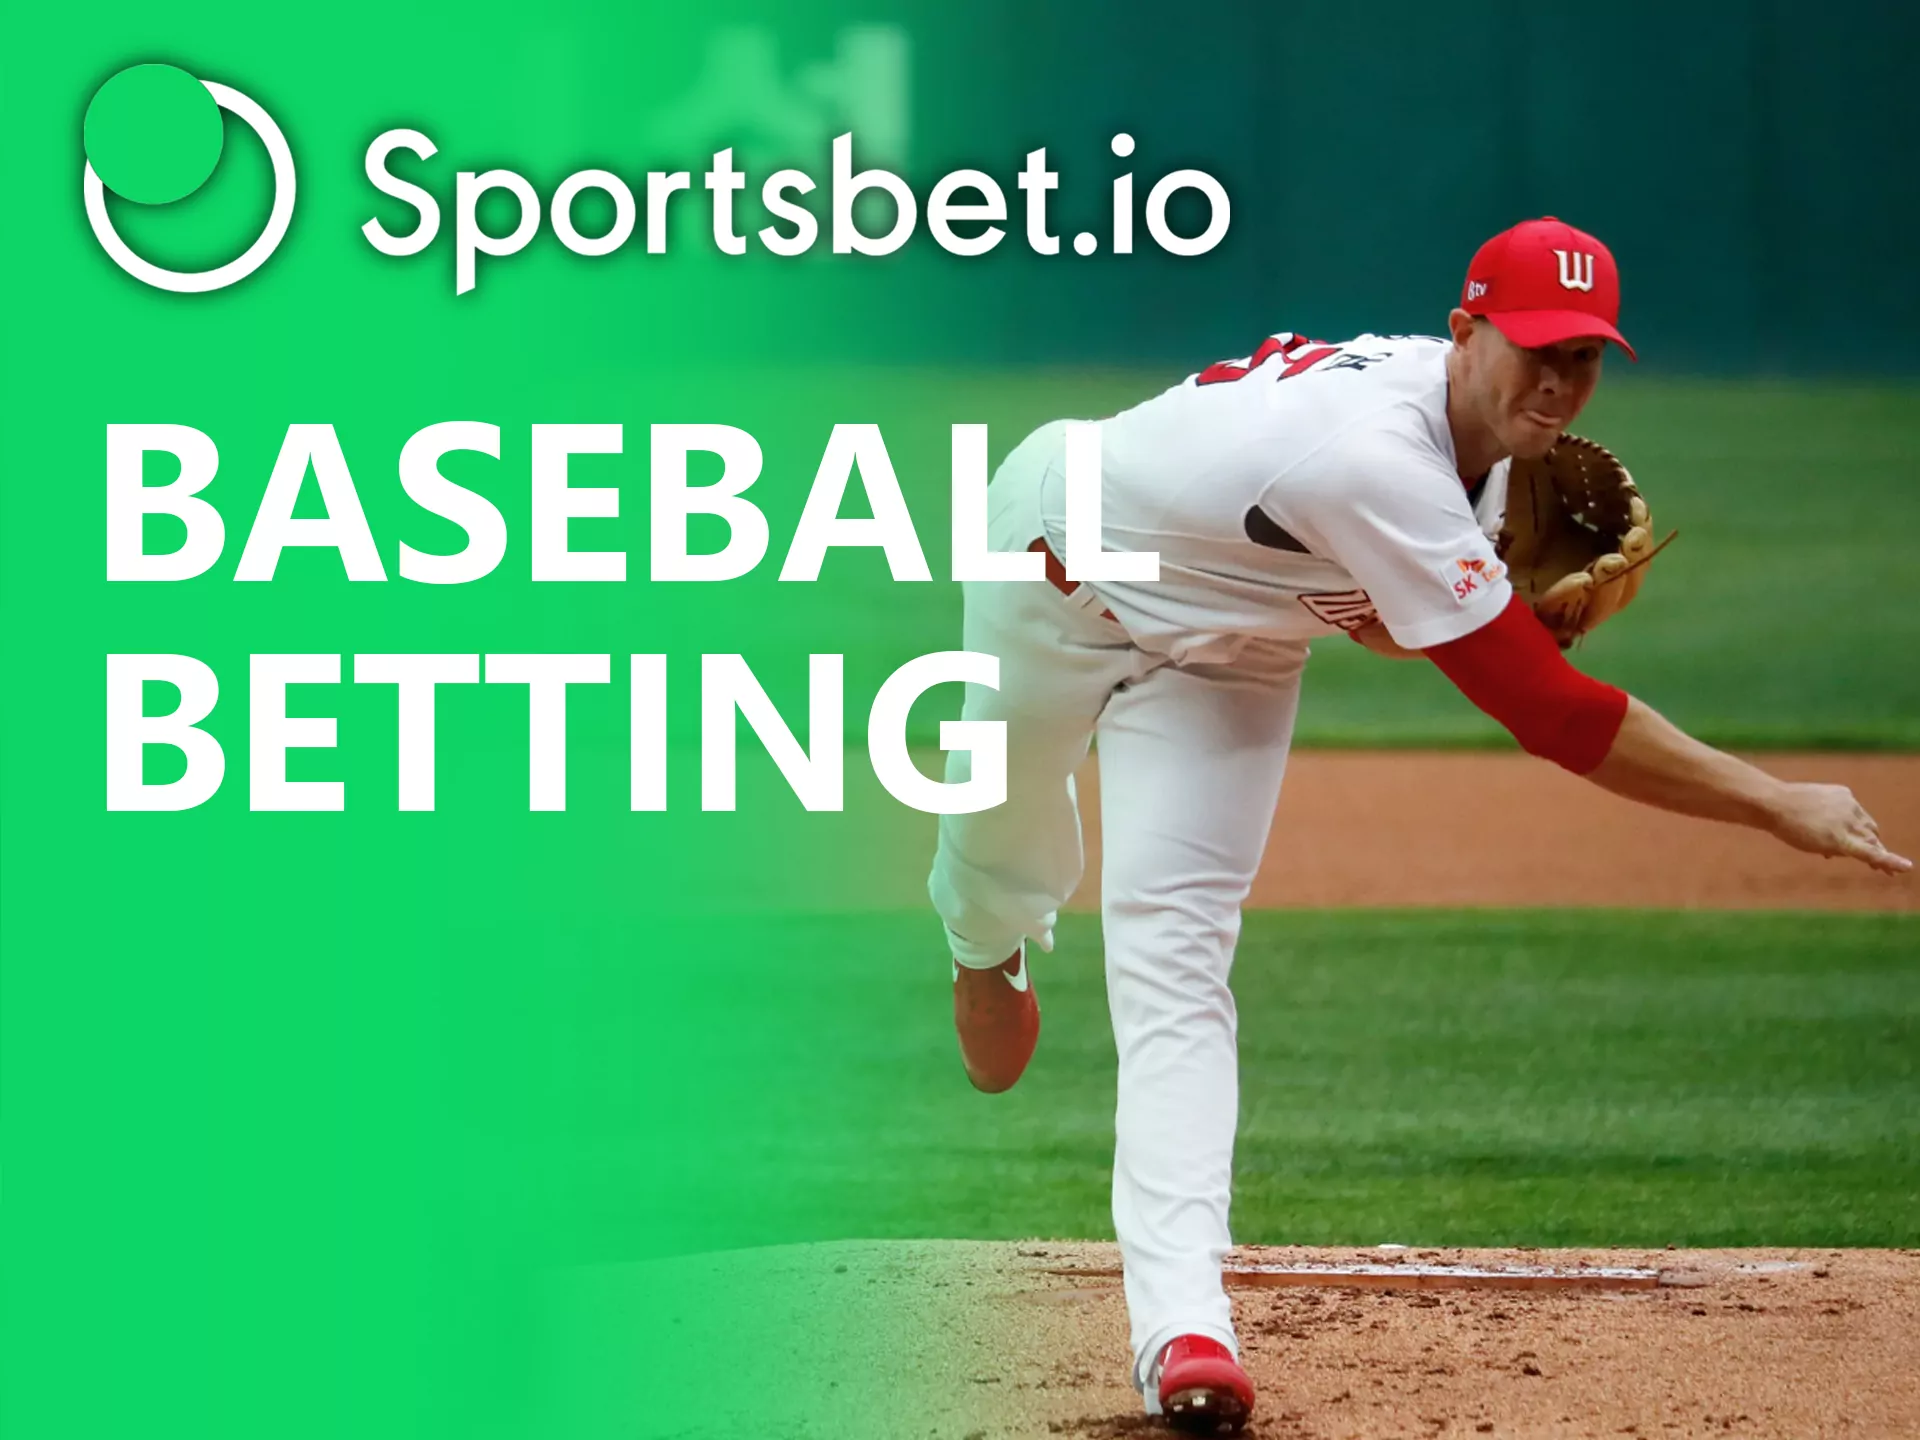 Baseball leagues are available for betting at Sportsbet.